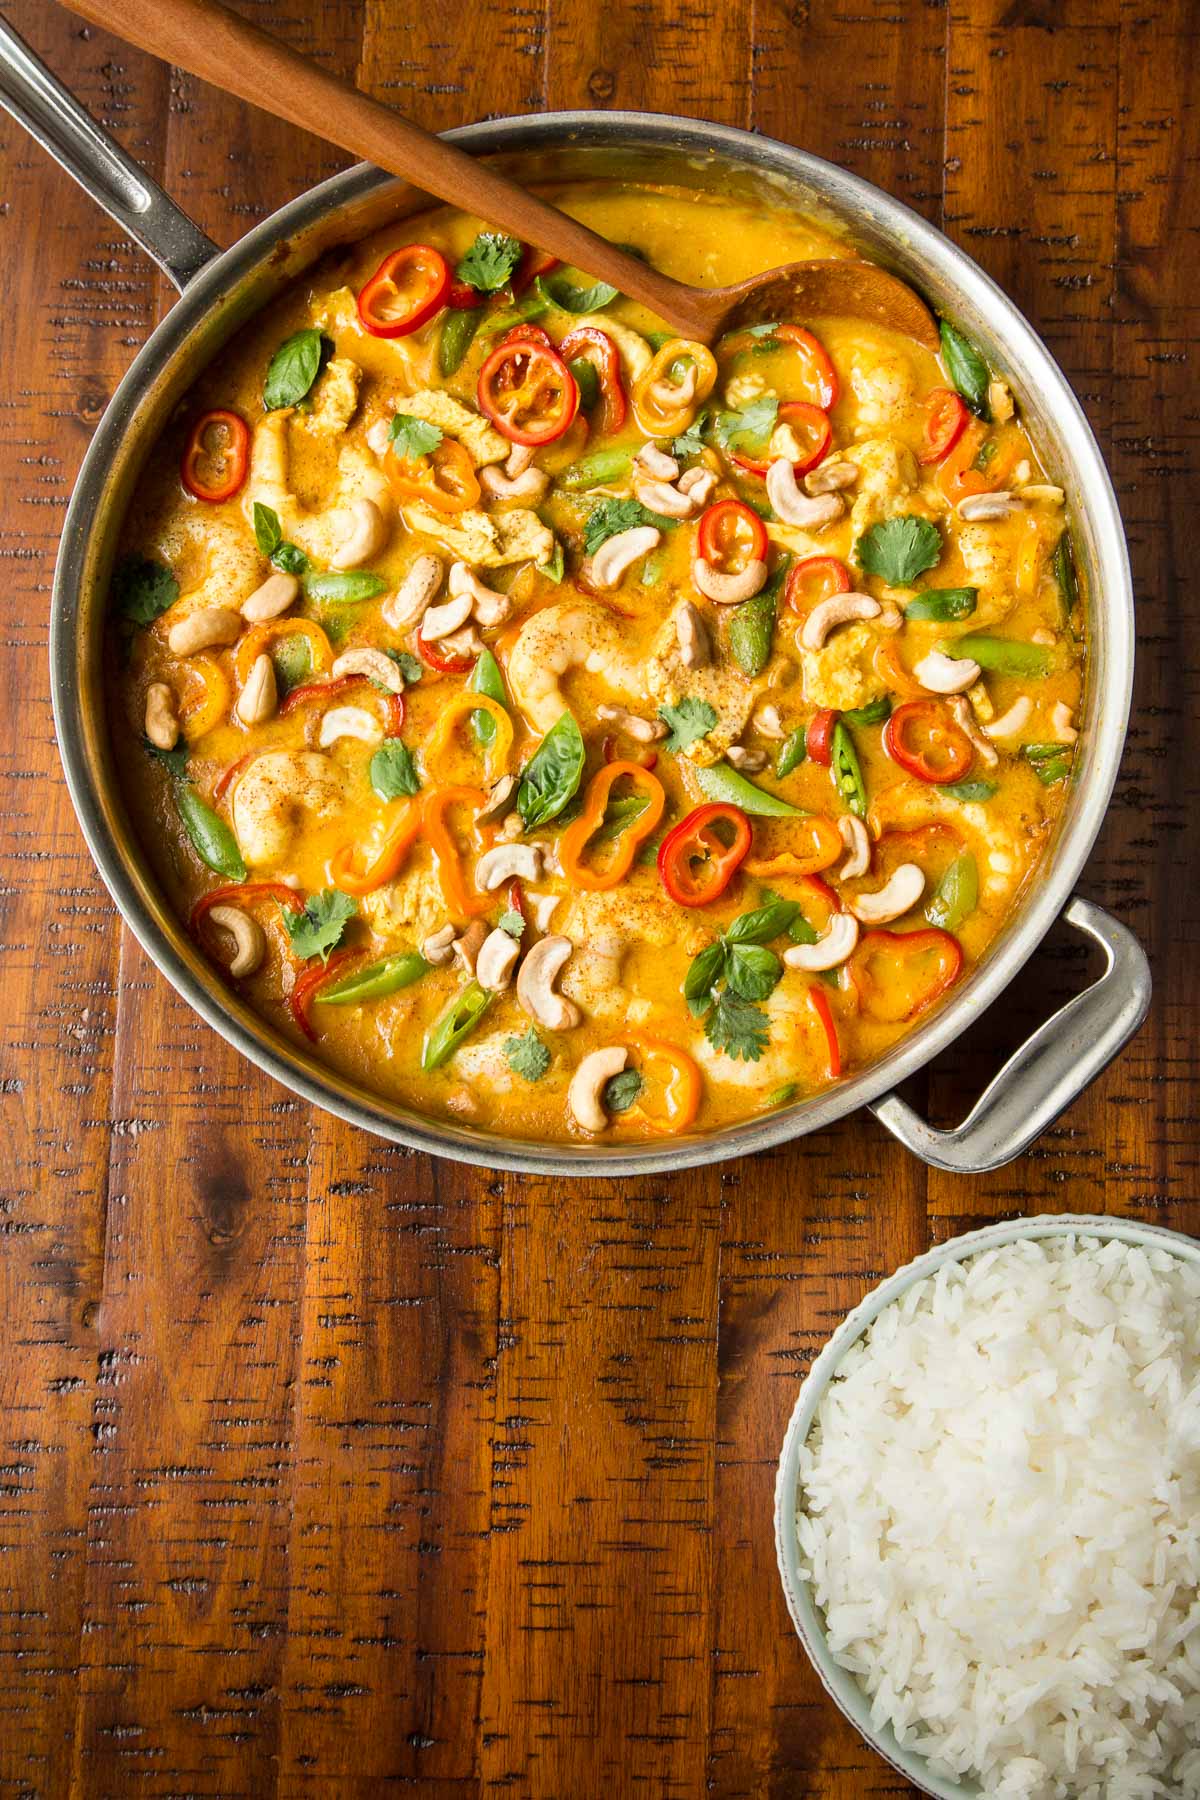 Overhead photo of a stainless steel pan filled with Shrimp and Chicken Cashew Curry on a wood table.